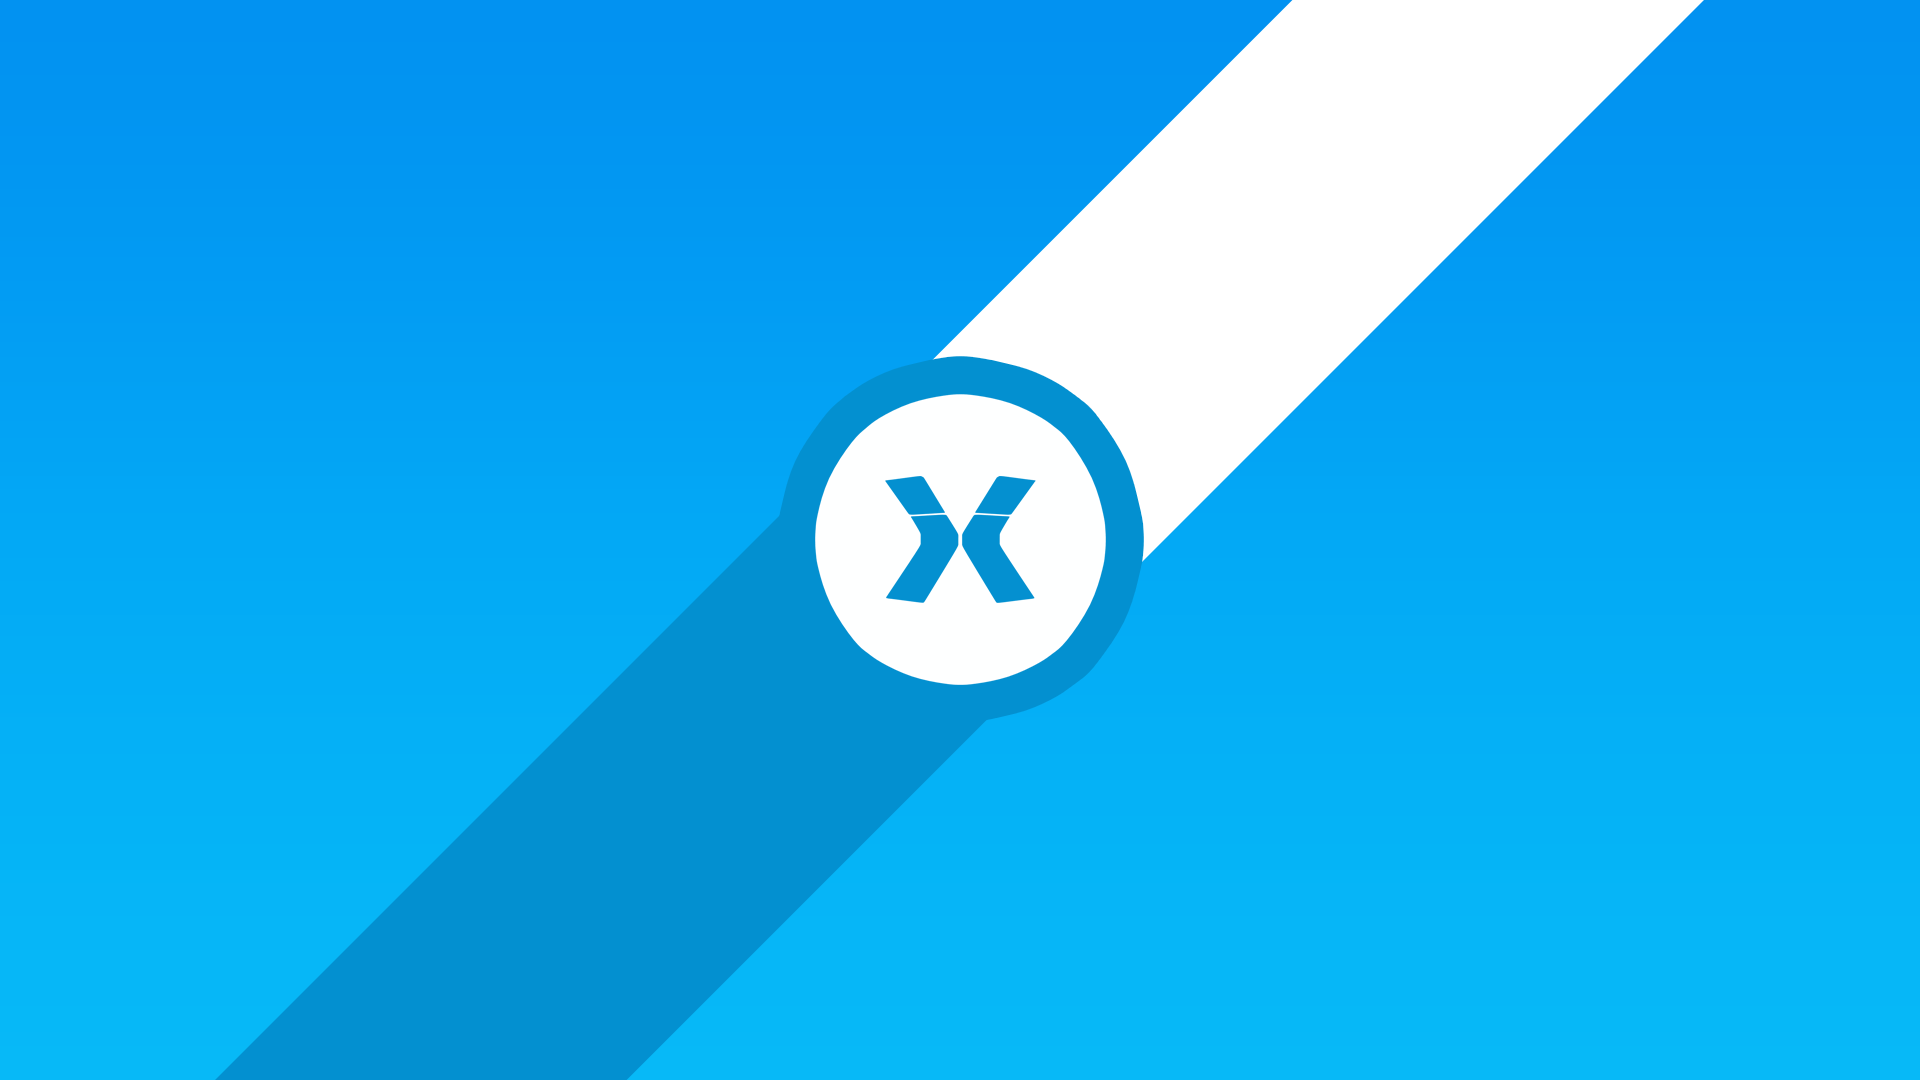 Superx Wallpaper based on Google's Material Design by mandeep7540 ...